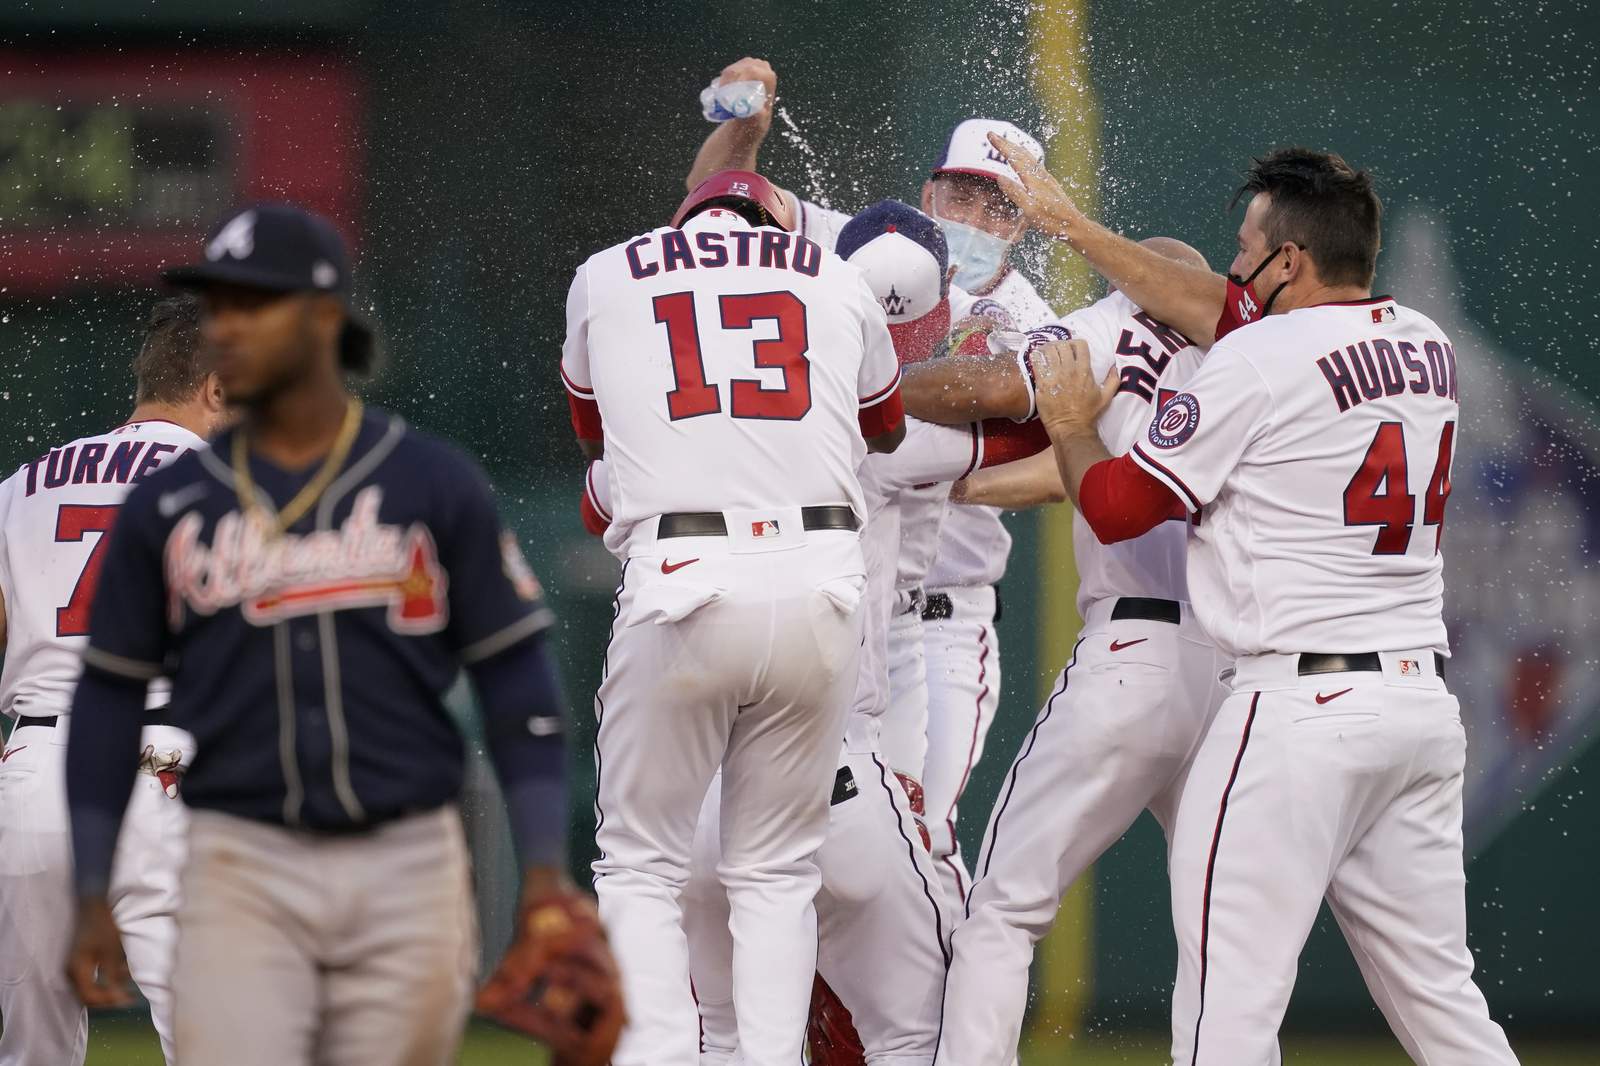 Nats finally play, beat Braves 6-5 on Soto's walk-off in 9th